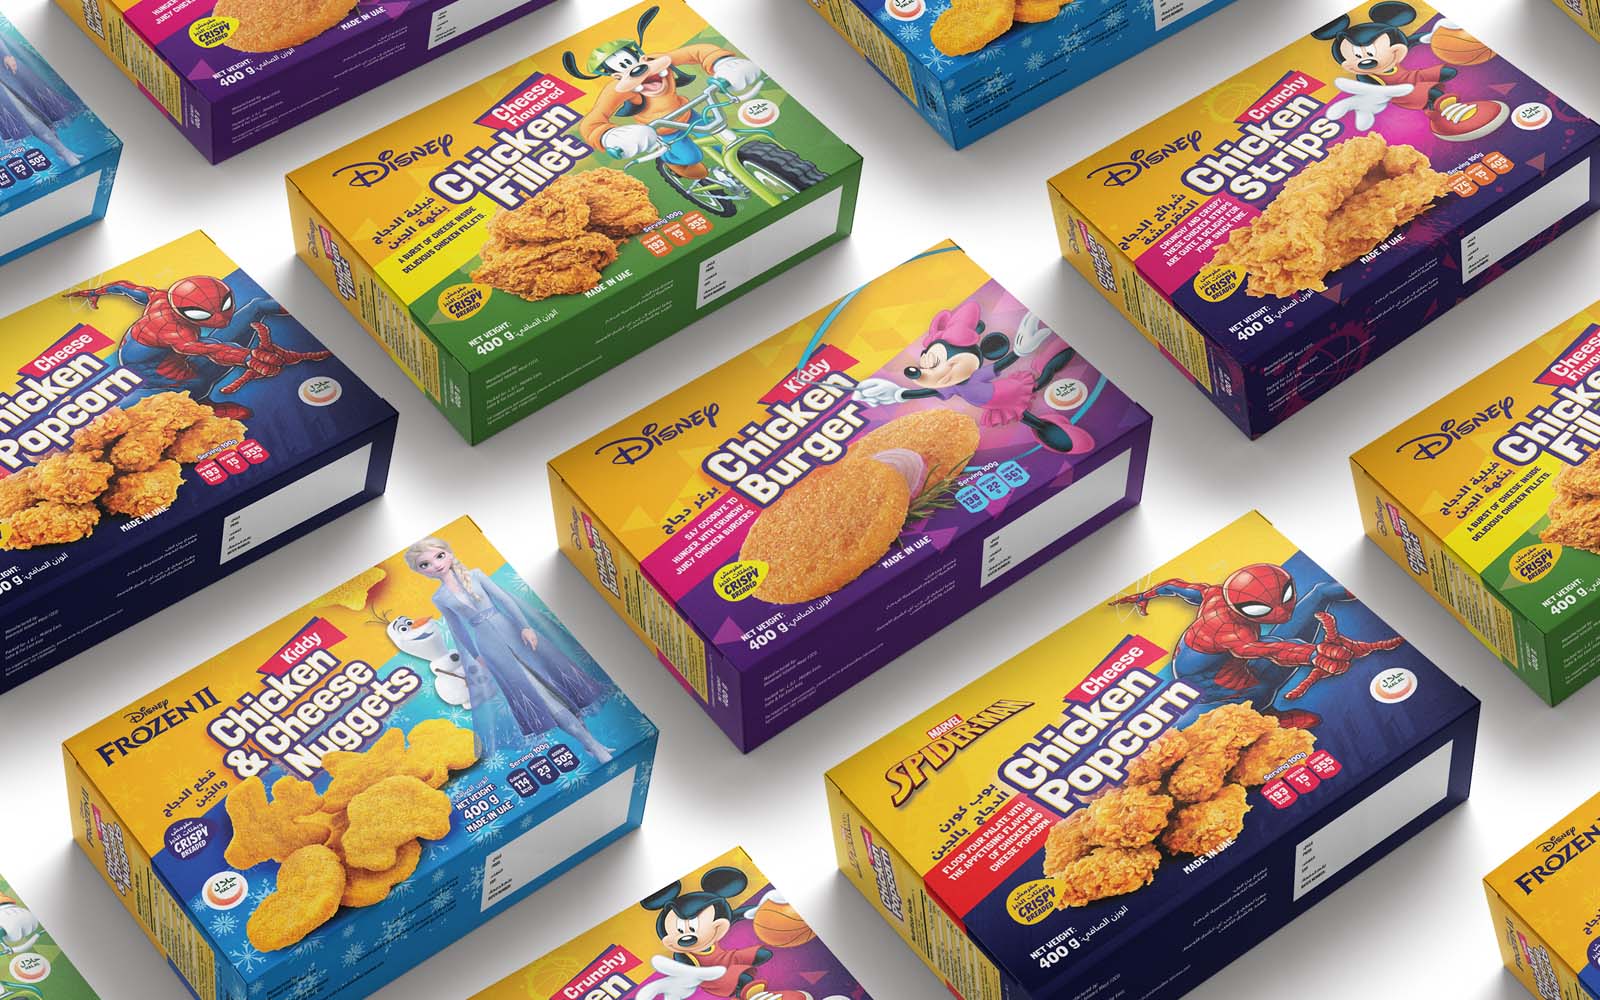 Developed vibrantly and eye-catching packaging designs that capture the magic of the brand.